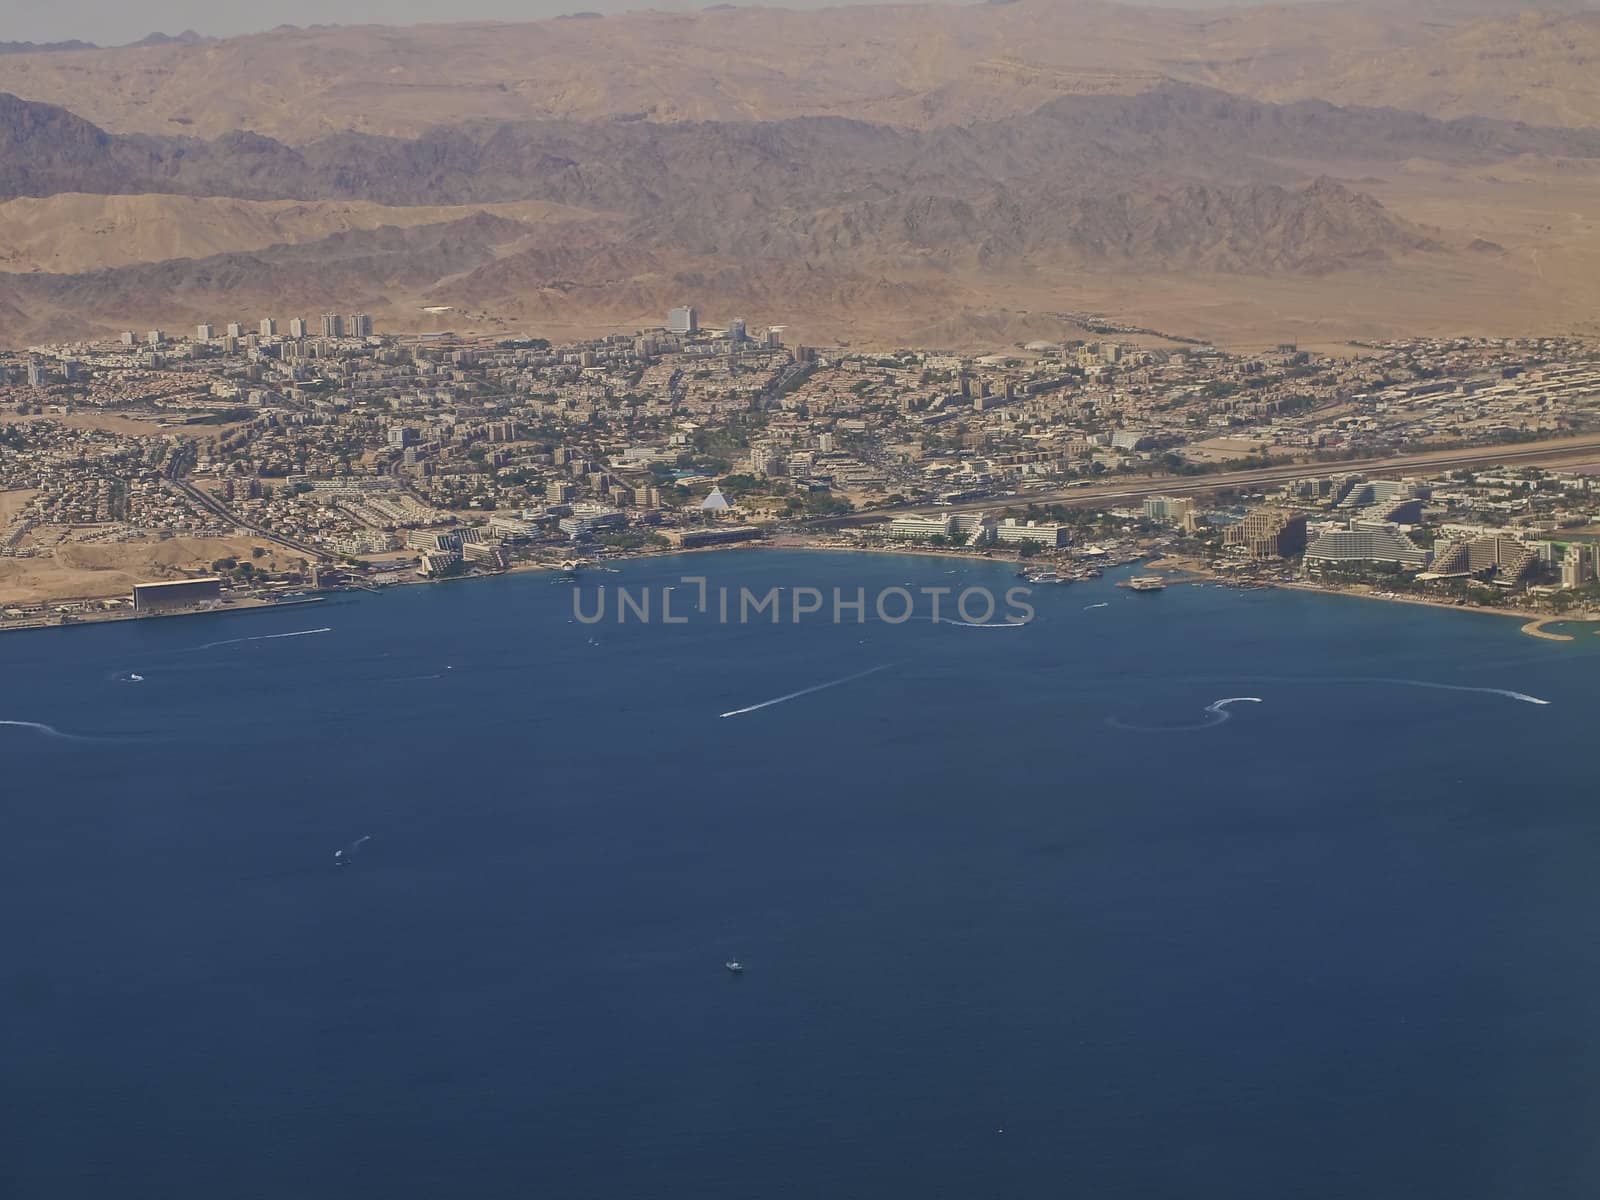 Aerial View of the city of Eilat